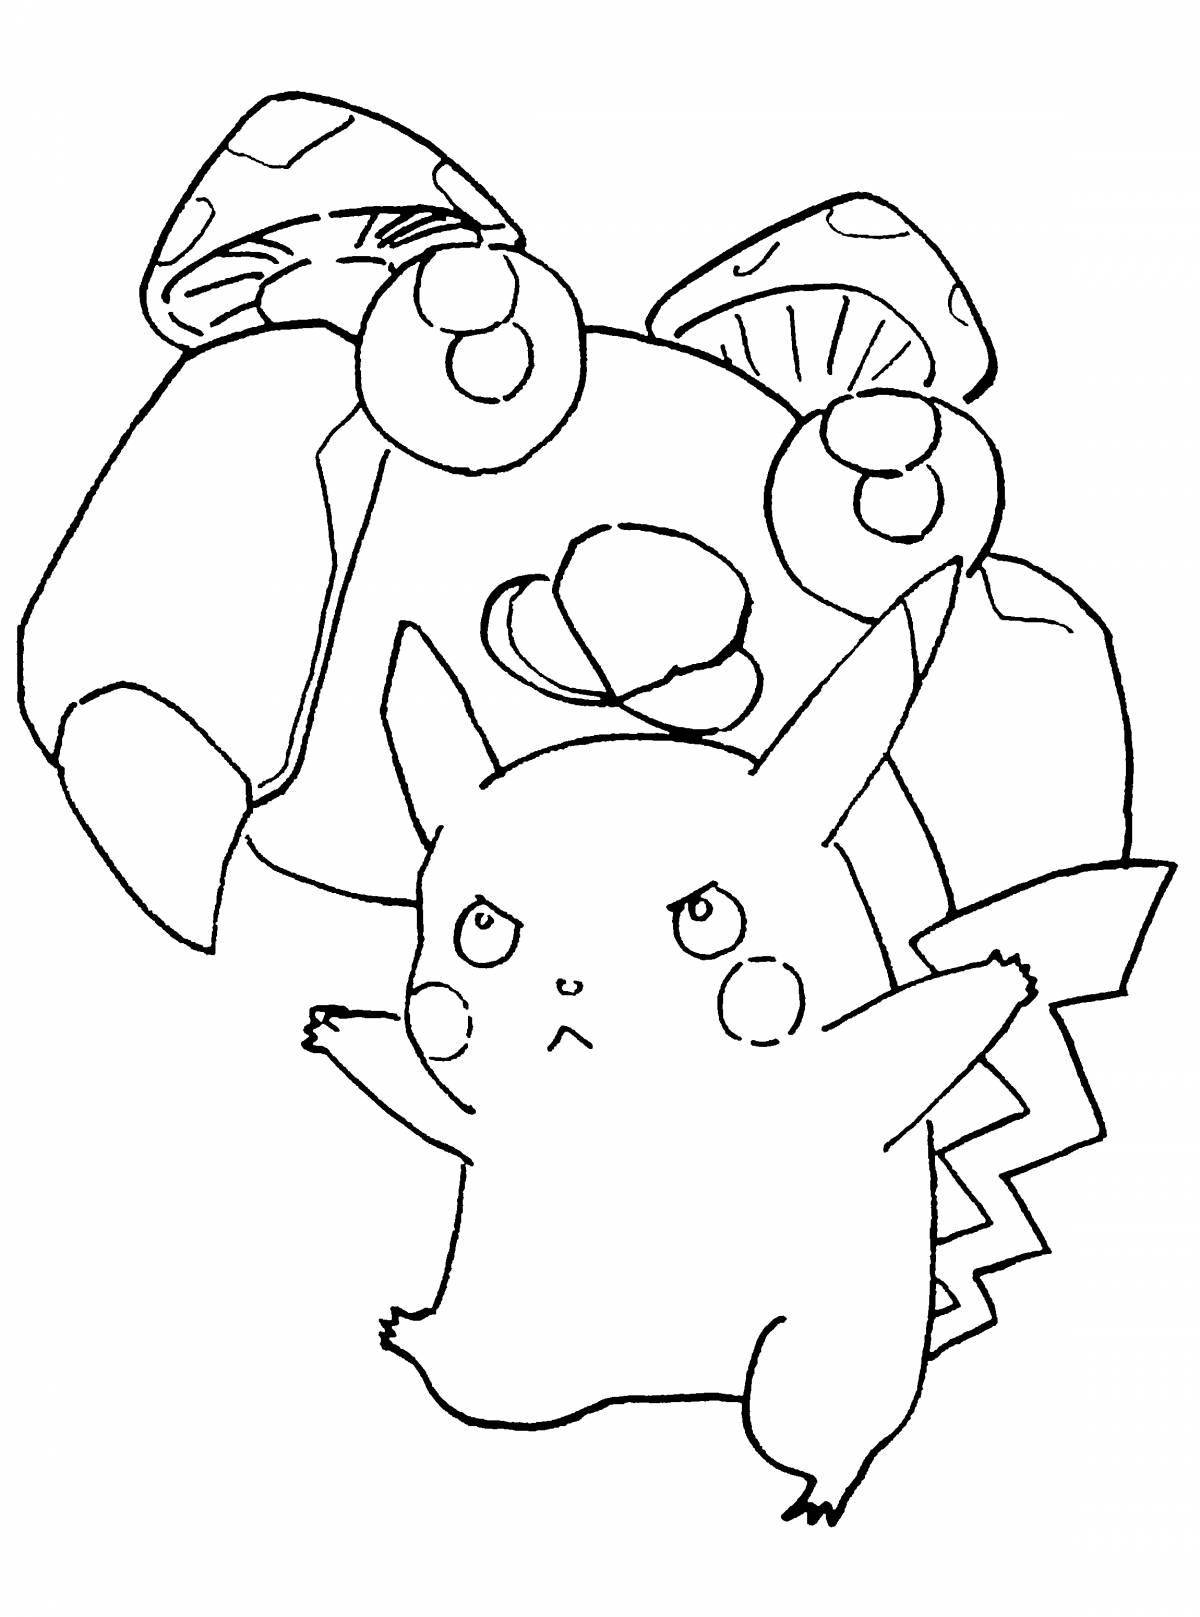 Grinning heart pikachu coloring book